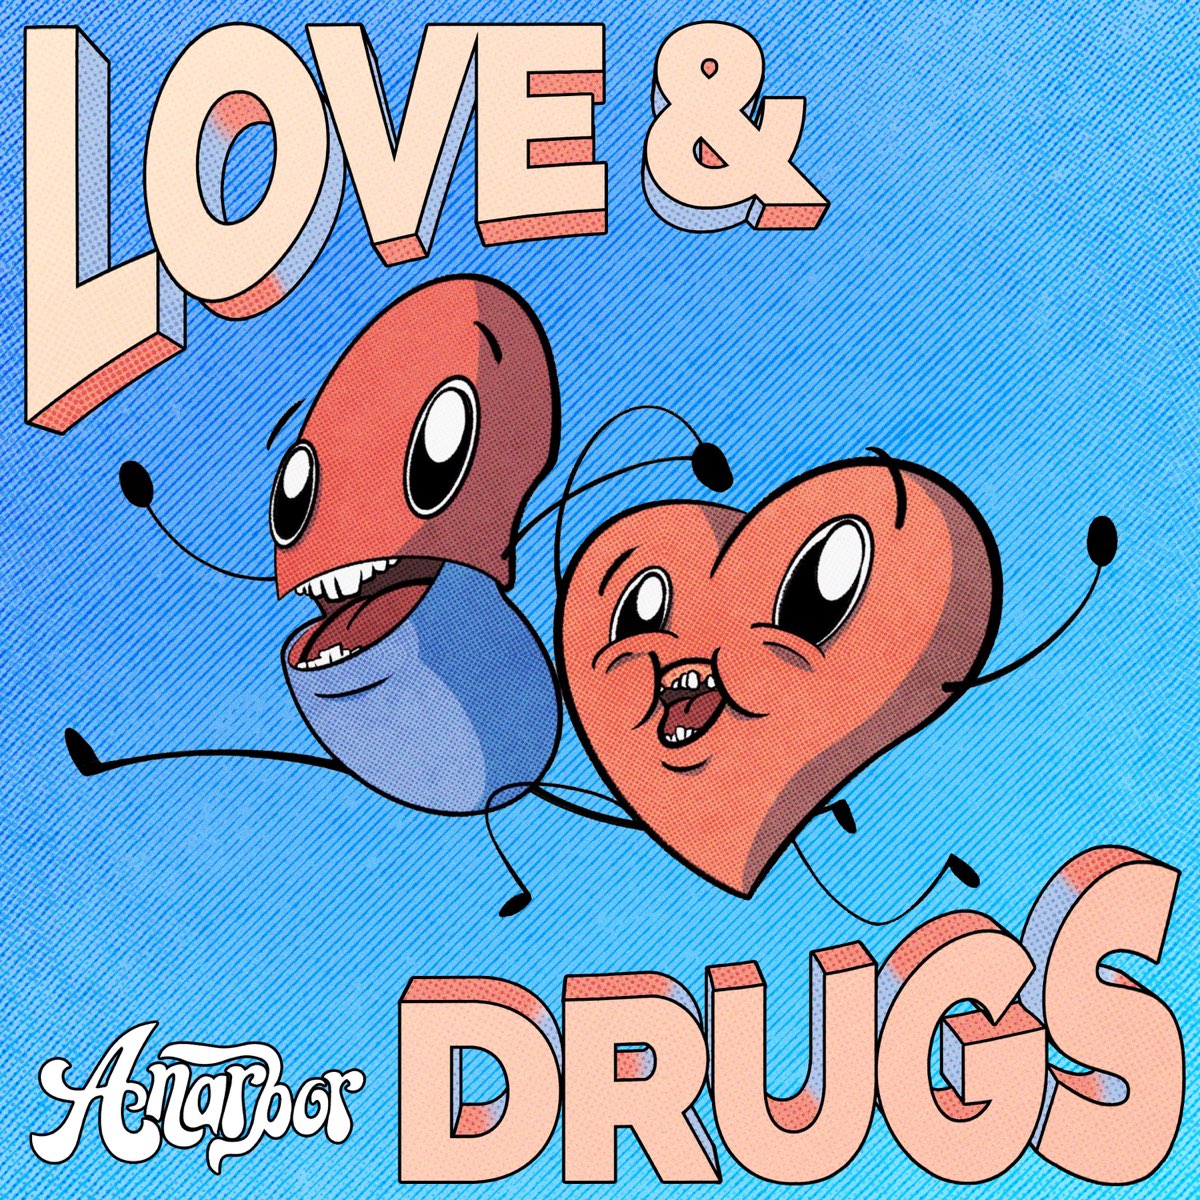 Love drug. Love is drugs. Belaganas. Anarbor yoi and i.